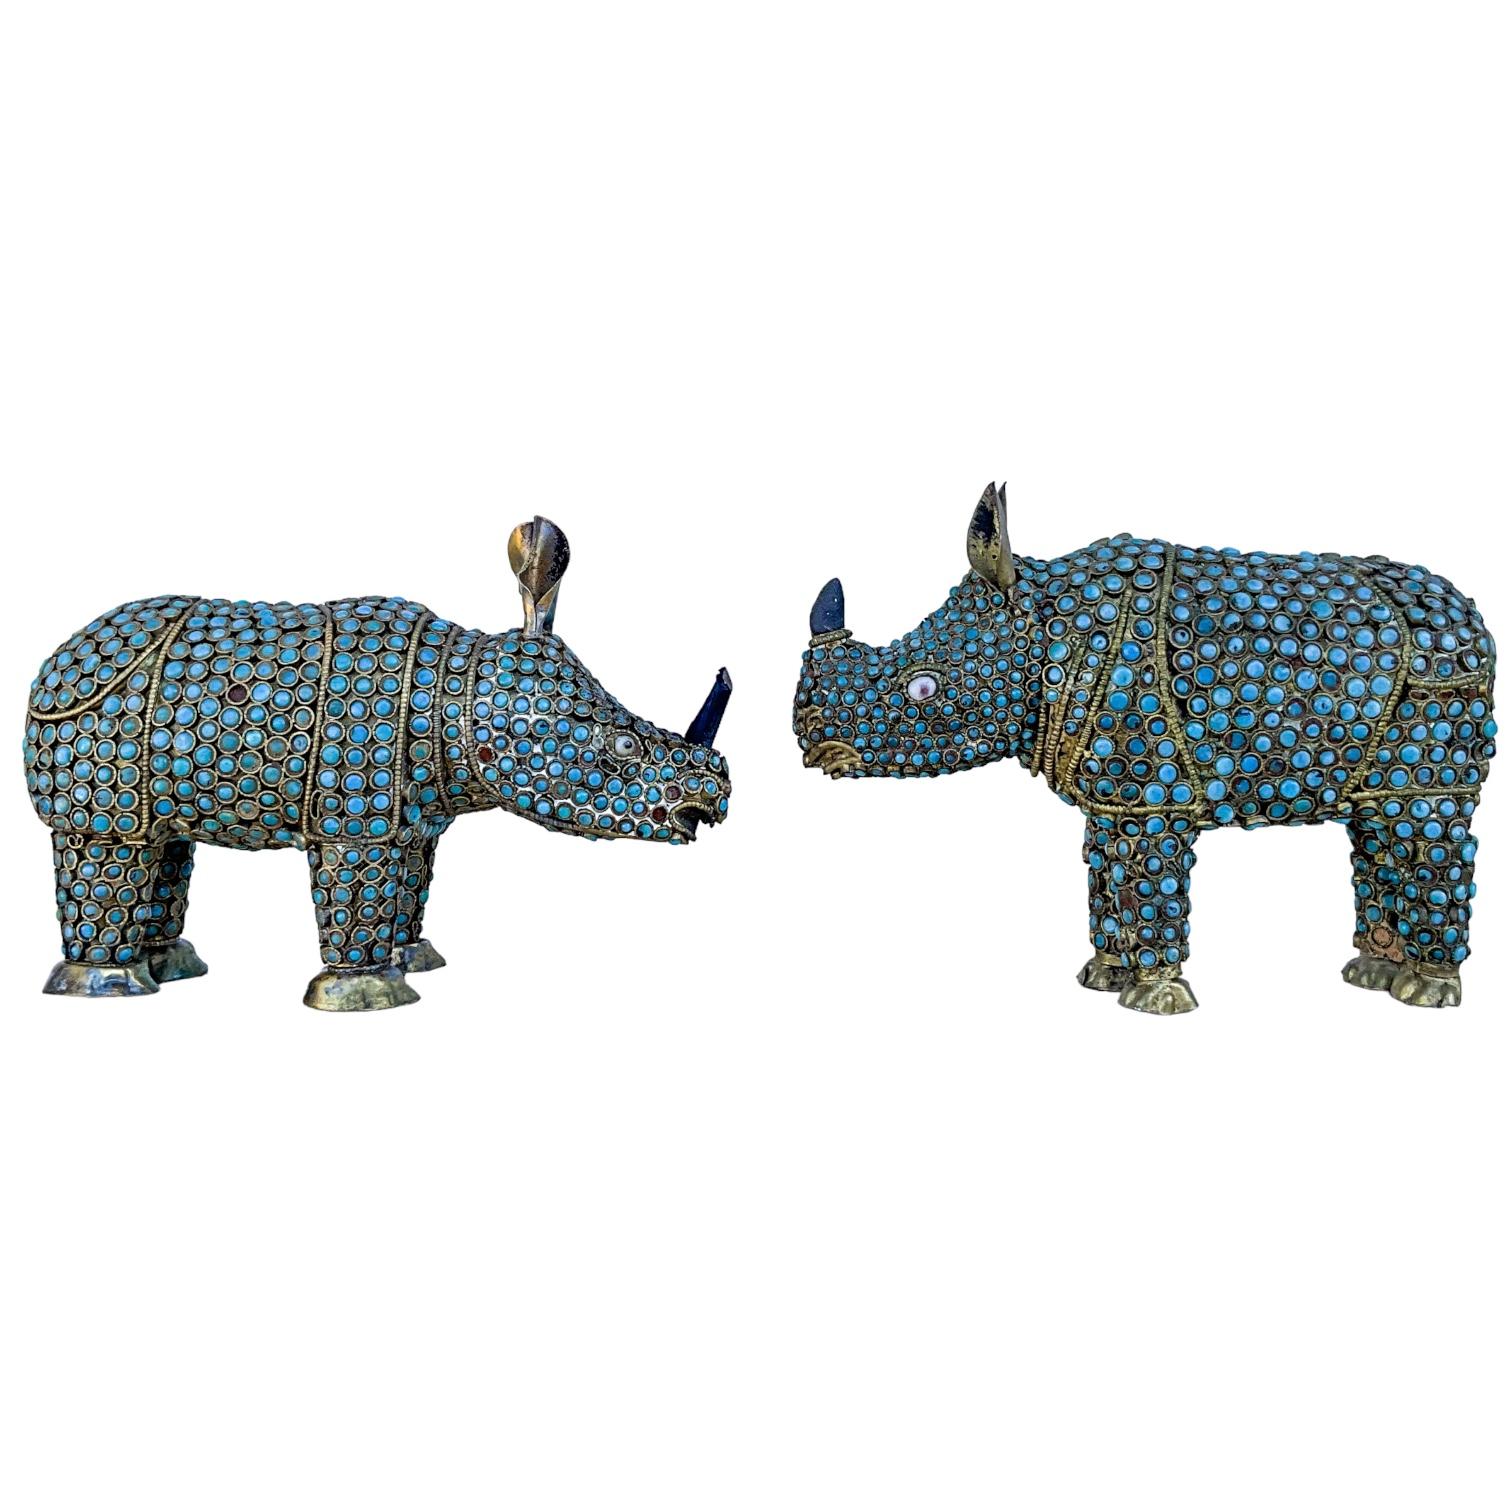 This is a set of two brass rhinos with a cloisonné style glass bead bodies. They are purported to be Tibetan. The horns are wood. The set has some lite age wear. 